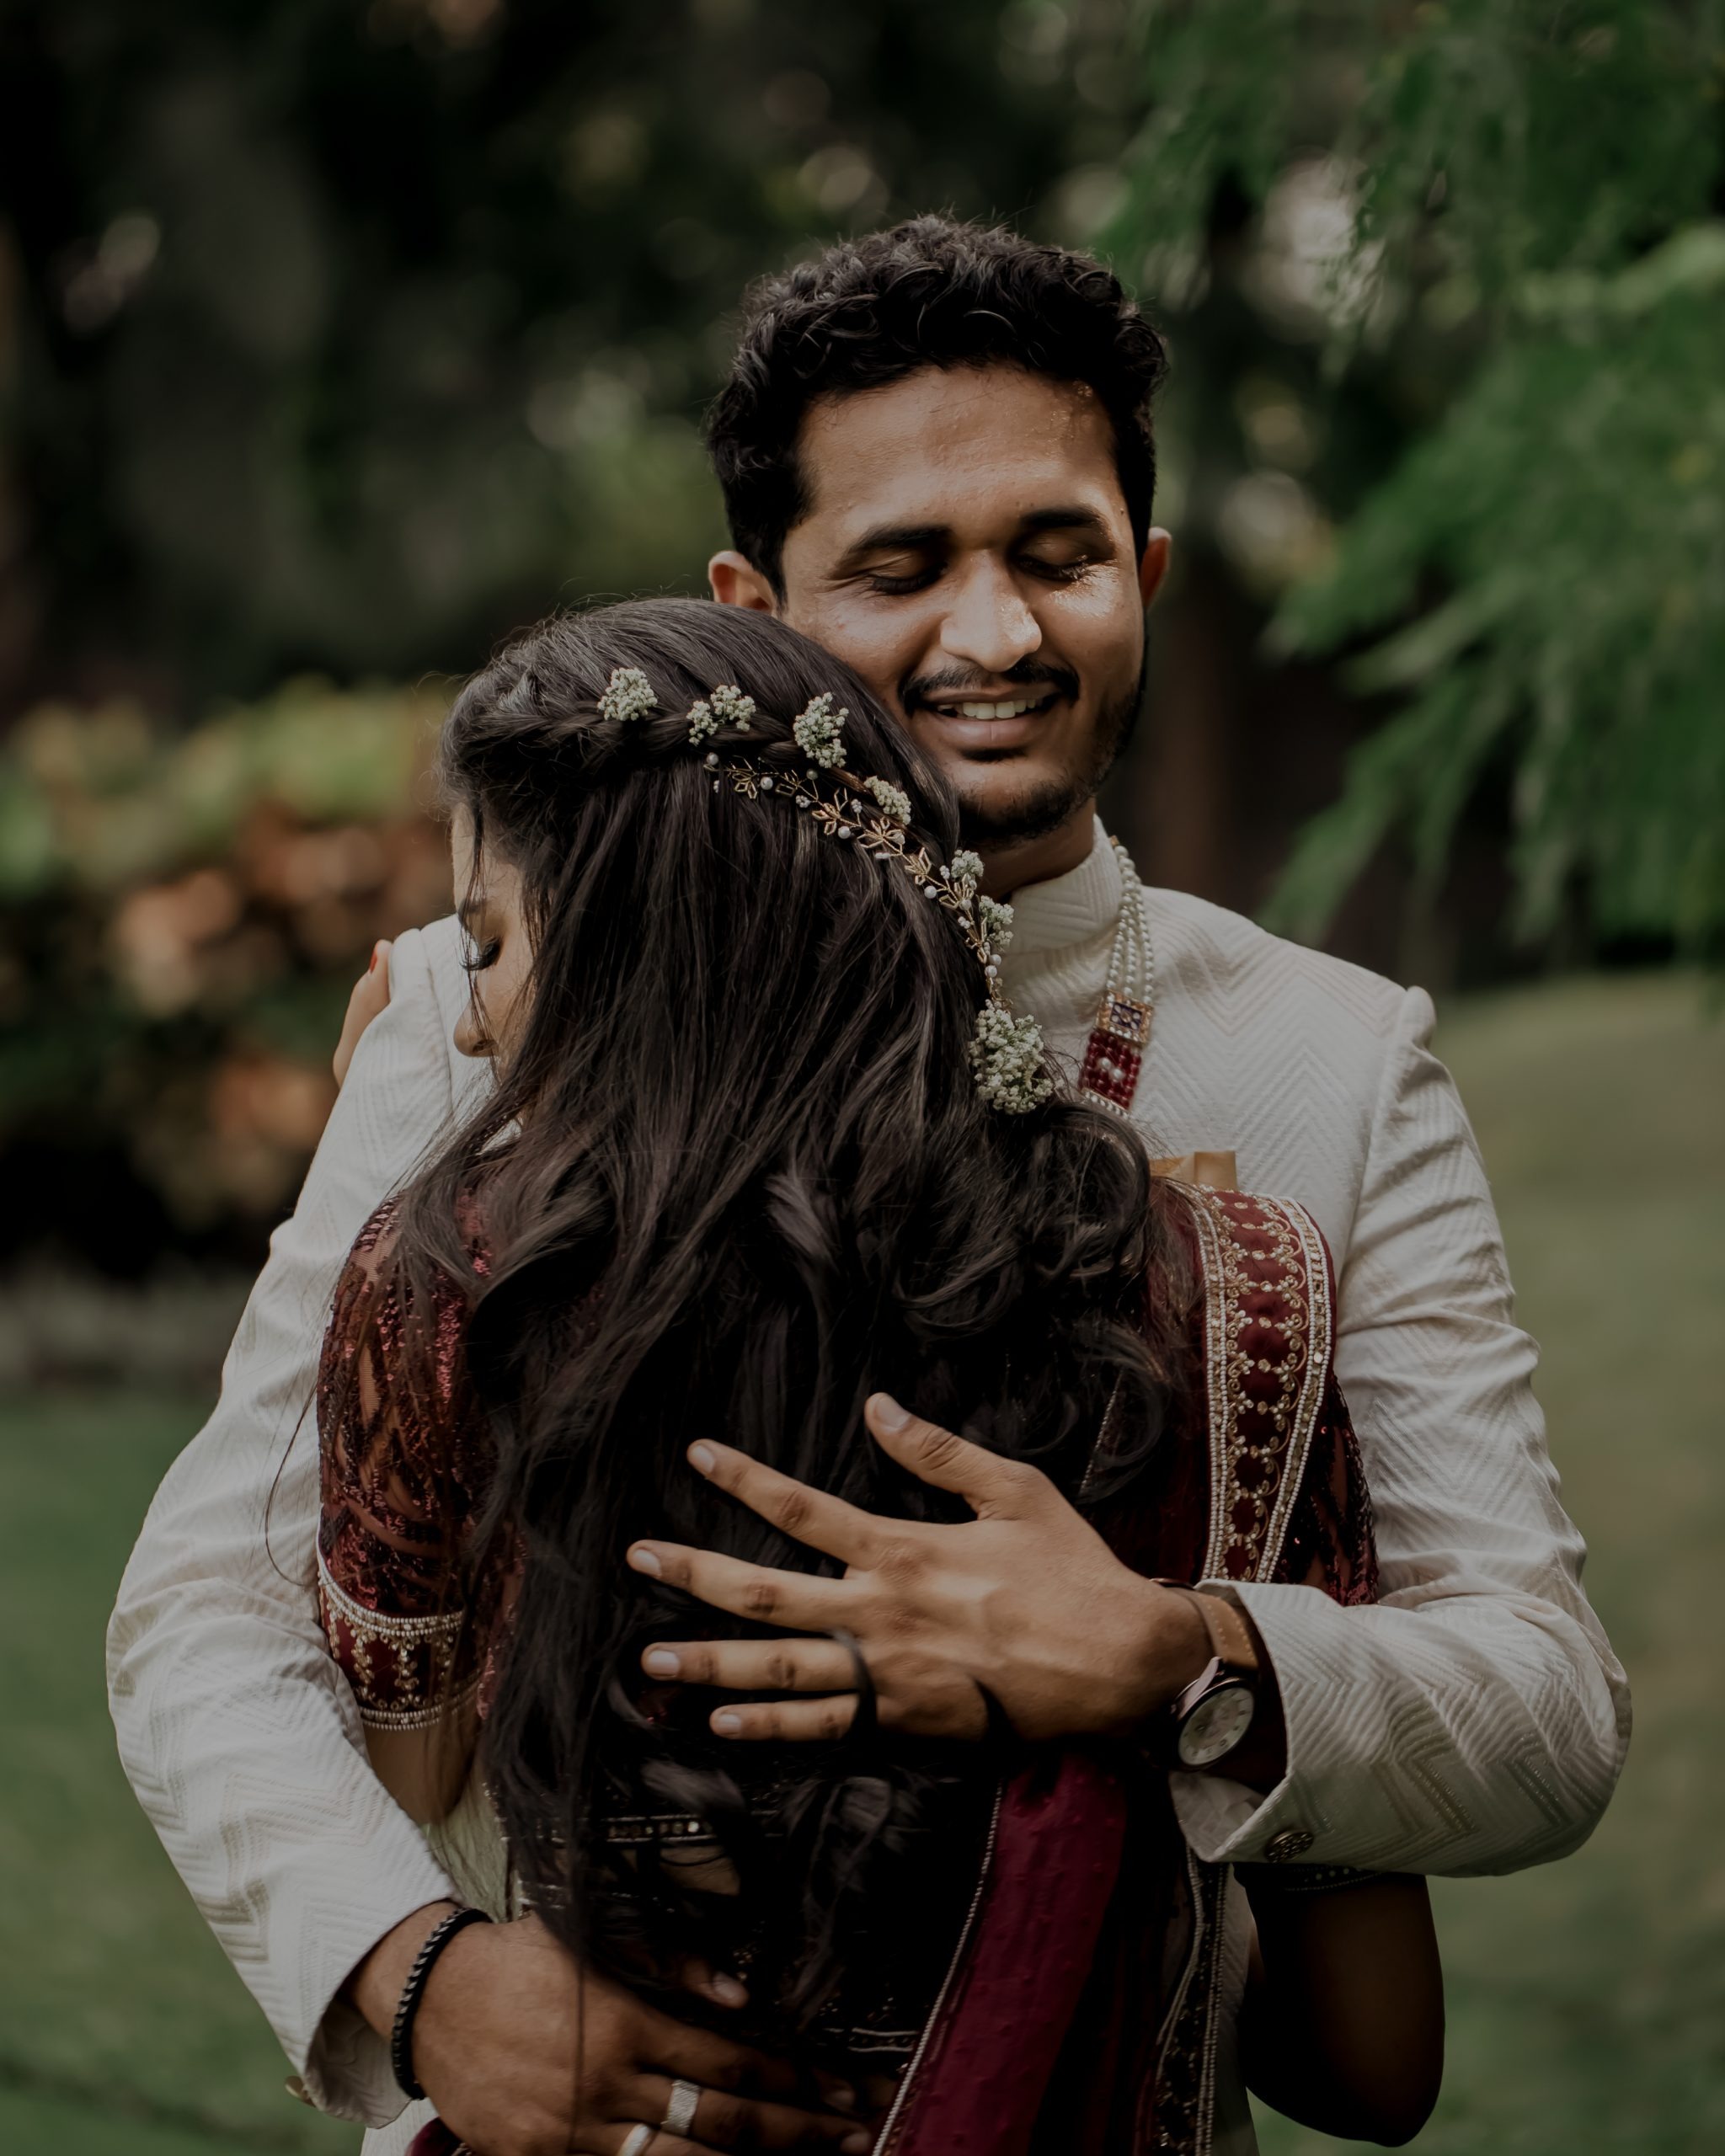 Indian Engagement Photos  Ring Ceremony Photography Poses